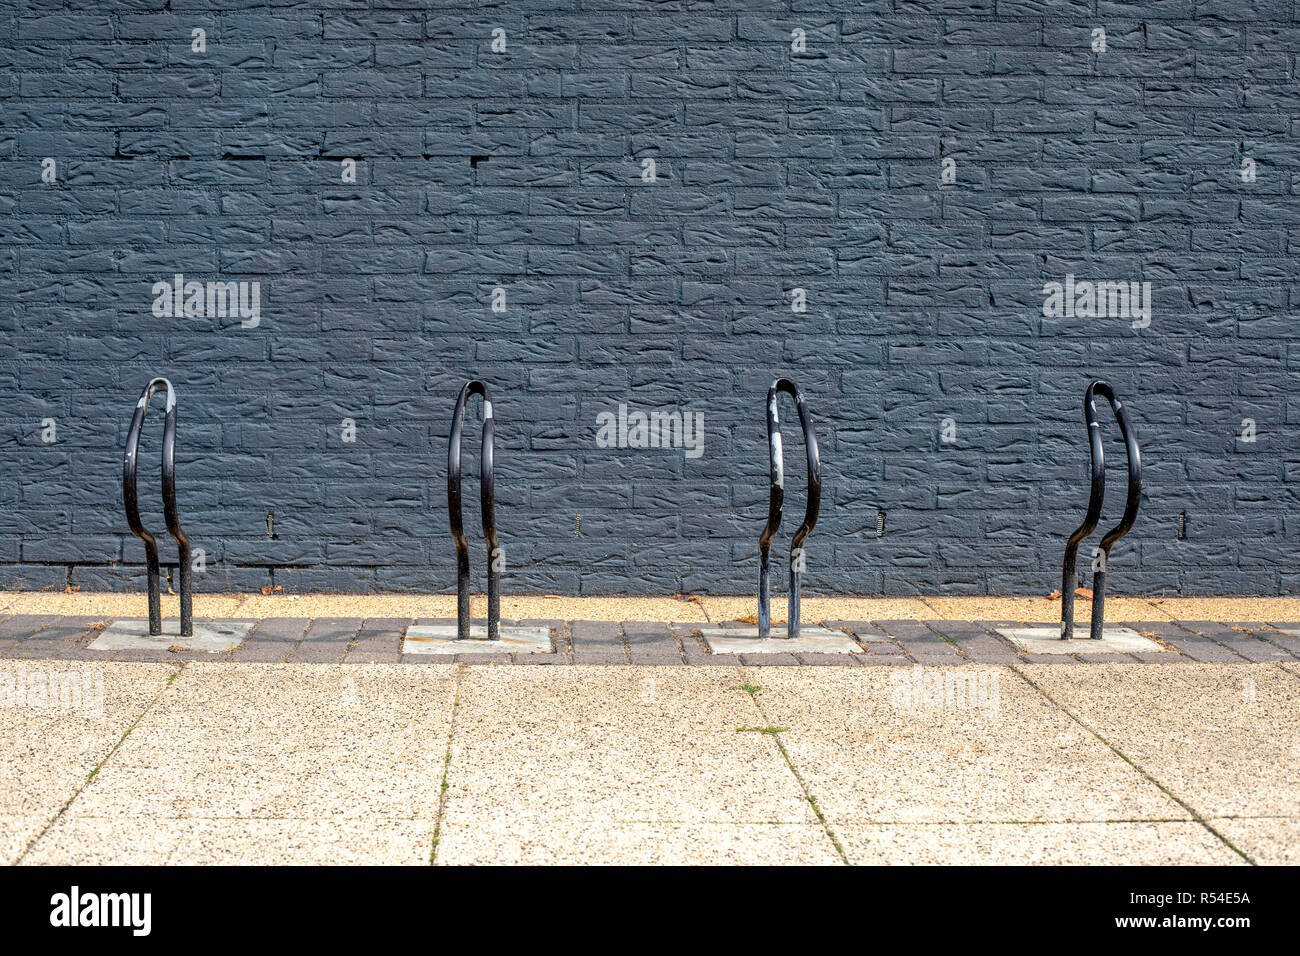 Very simple bike, bicycle racks, painted black in front of a black brick wall. Stock Photo